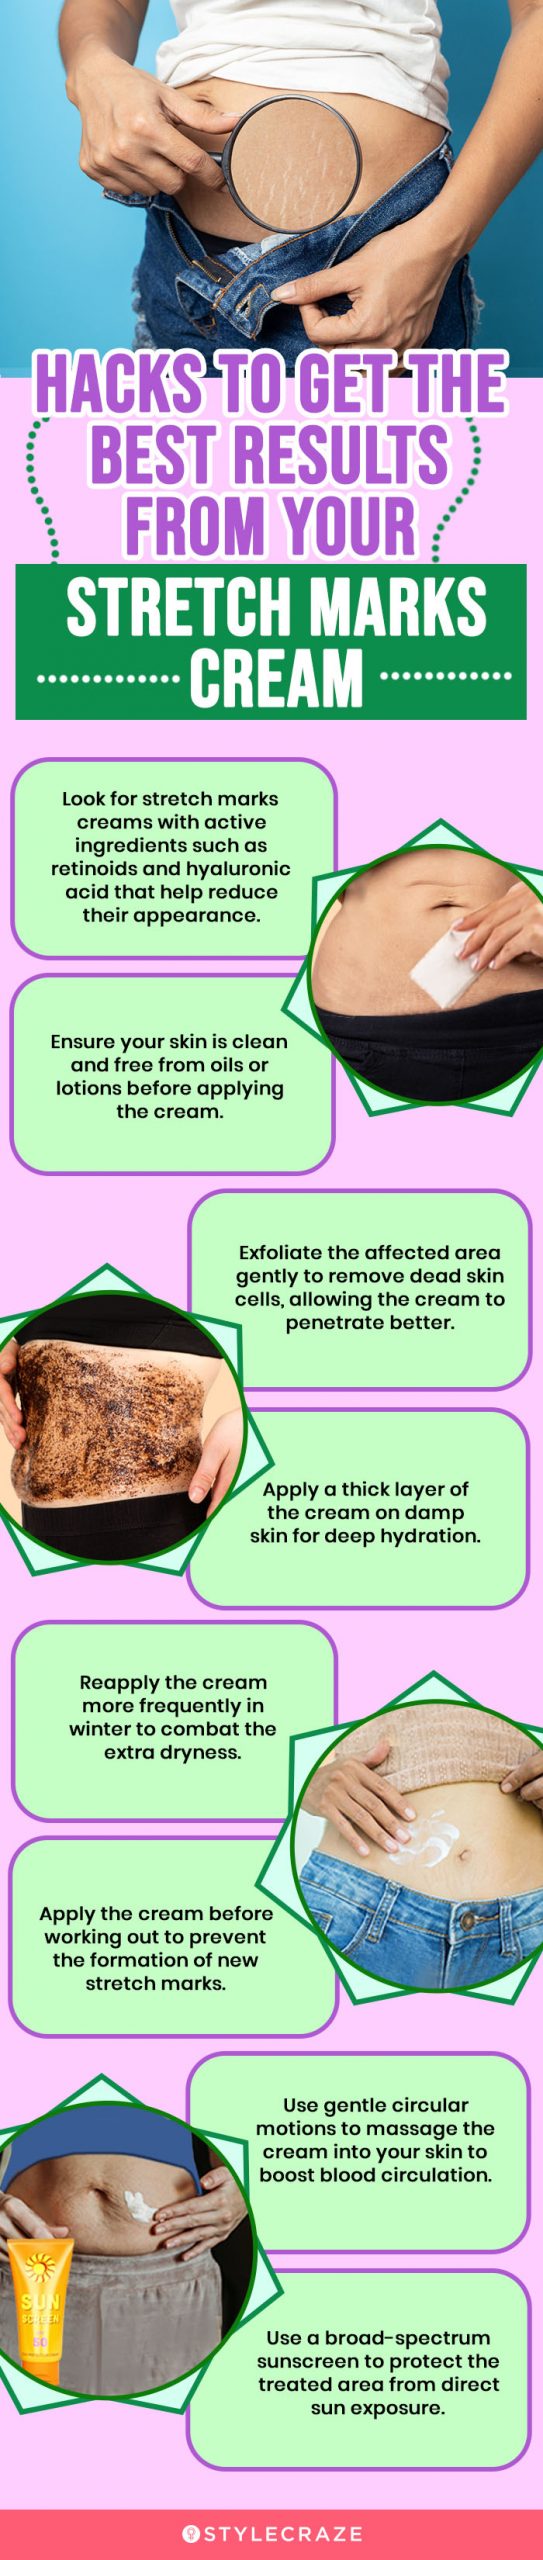 Hacks To Get The Best Results From Your Stretch Marks Cream (infographic)